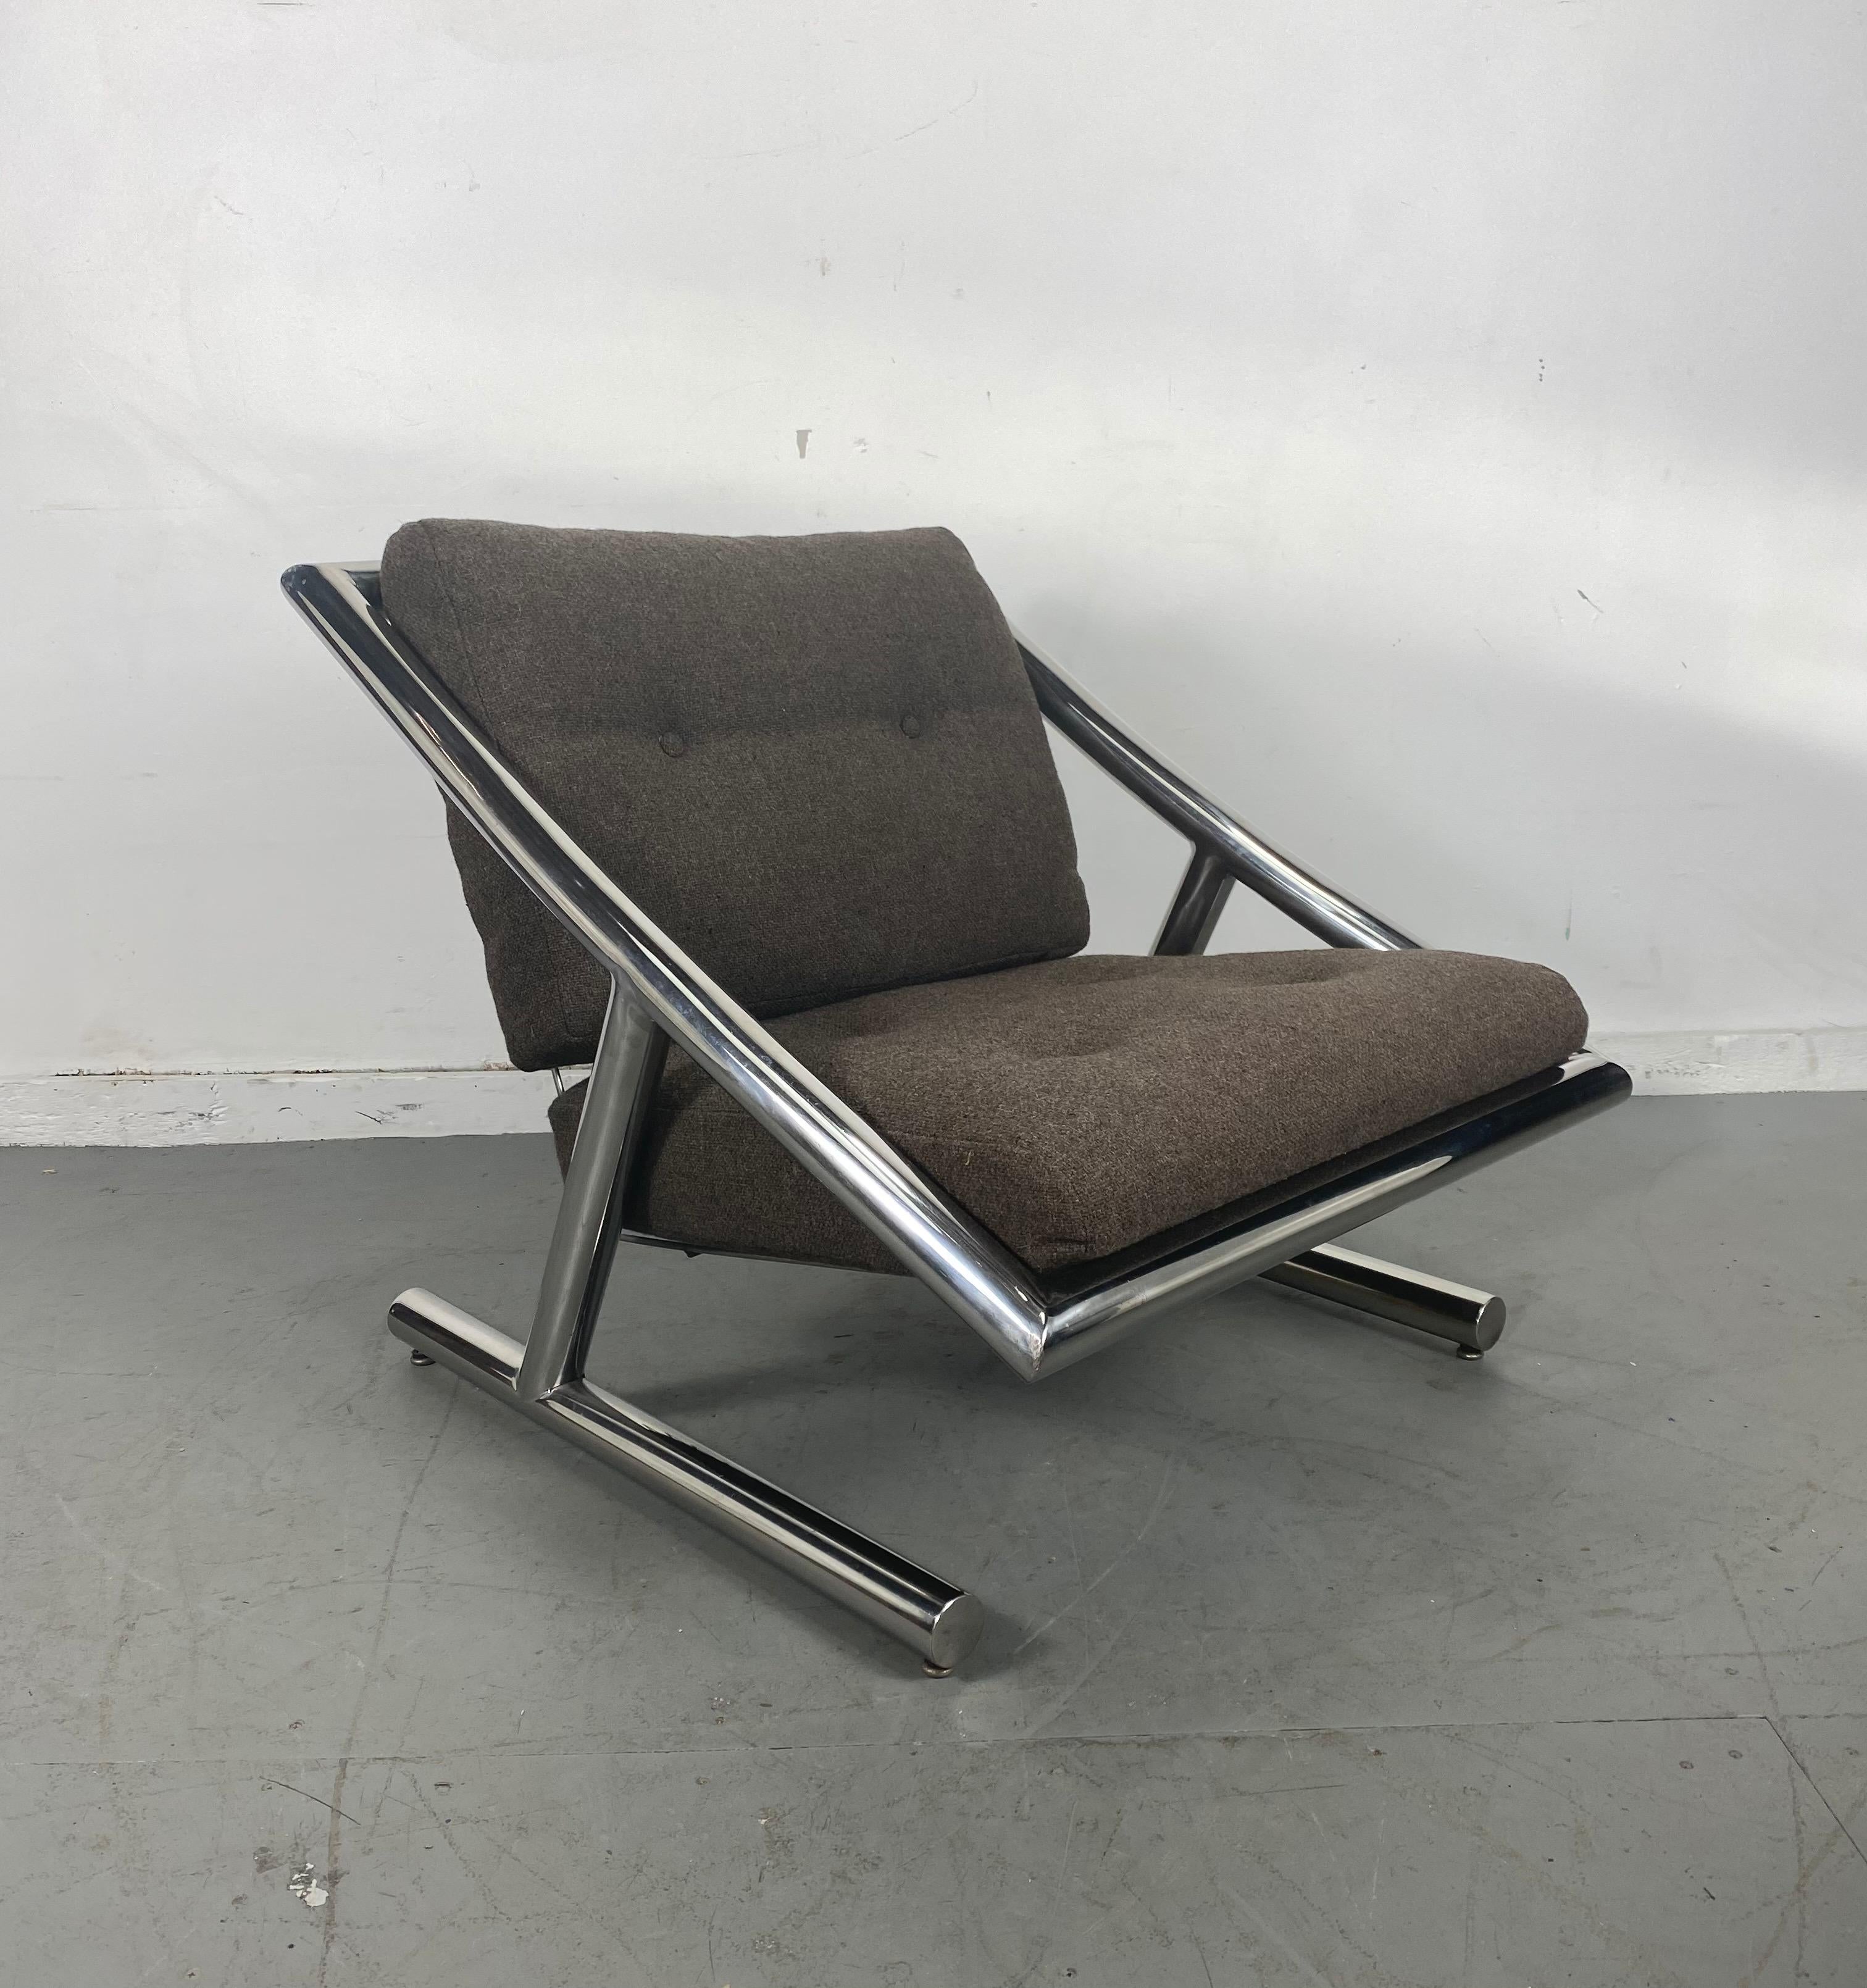 Italian Rare Space Age, Modernist Chromed Steel Lounge Chair by Plato Ginello, Italy For Sale